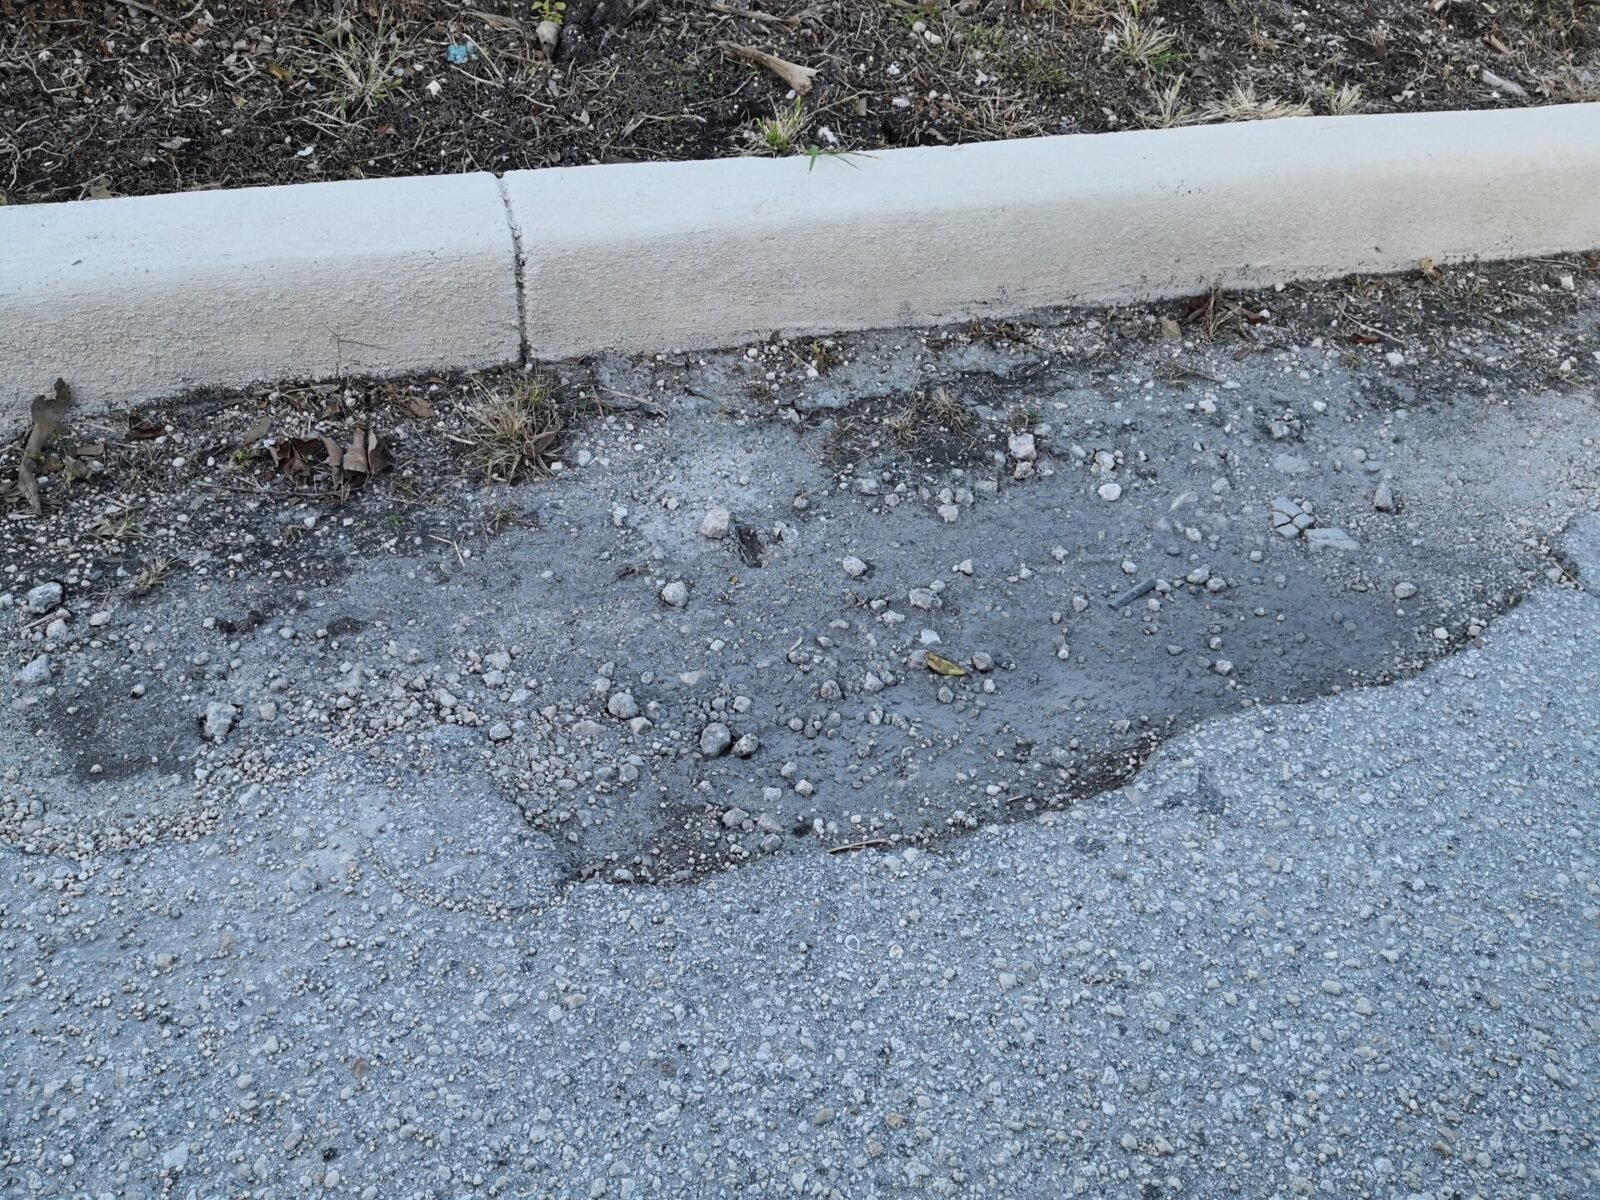 A pothole with broken asphalt and loose gravel is situated near a curb in an asphalt-paved area. The surrounding surface shows signs of wear and deterioration, with small patches of grass and dirt visible along the edge of the curb—a reminder that quality asphalt paving services like those provided by Palm Beach Asphalt are essential.